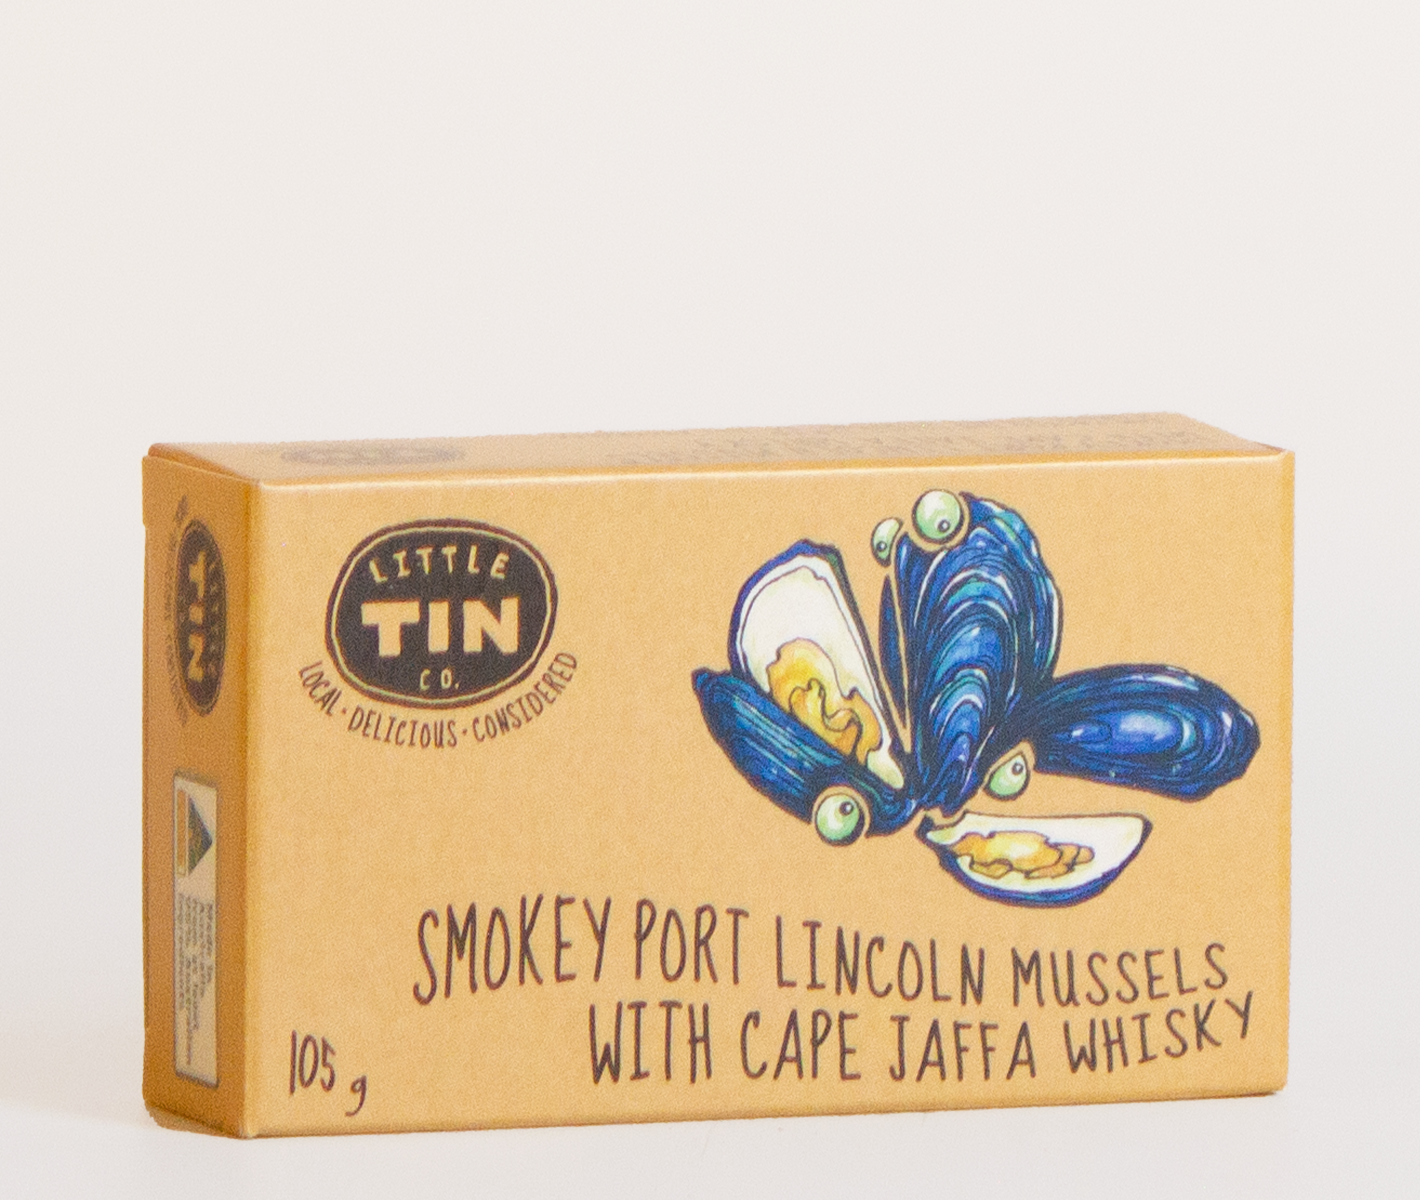 Smokey Port Lincoln Mussels with Cape Jaffa Whisky (105g)